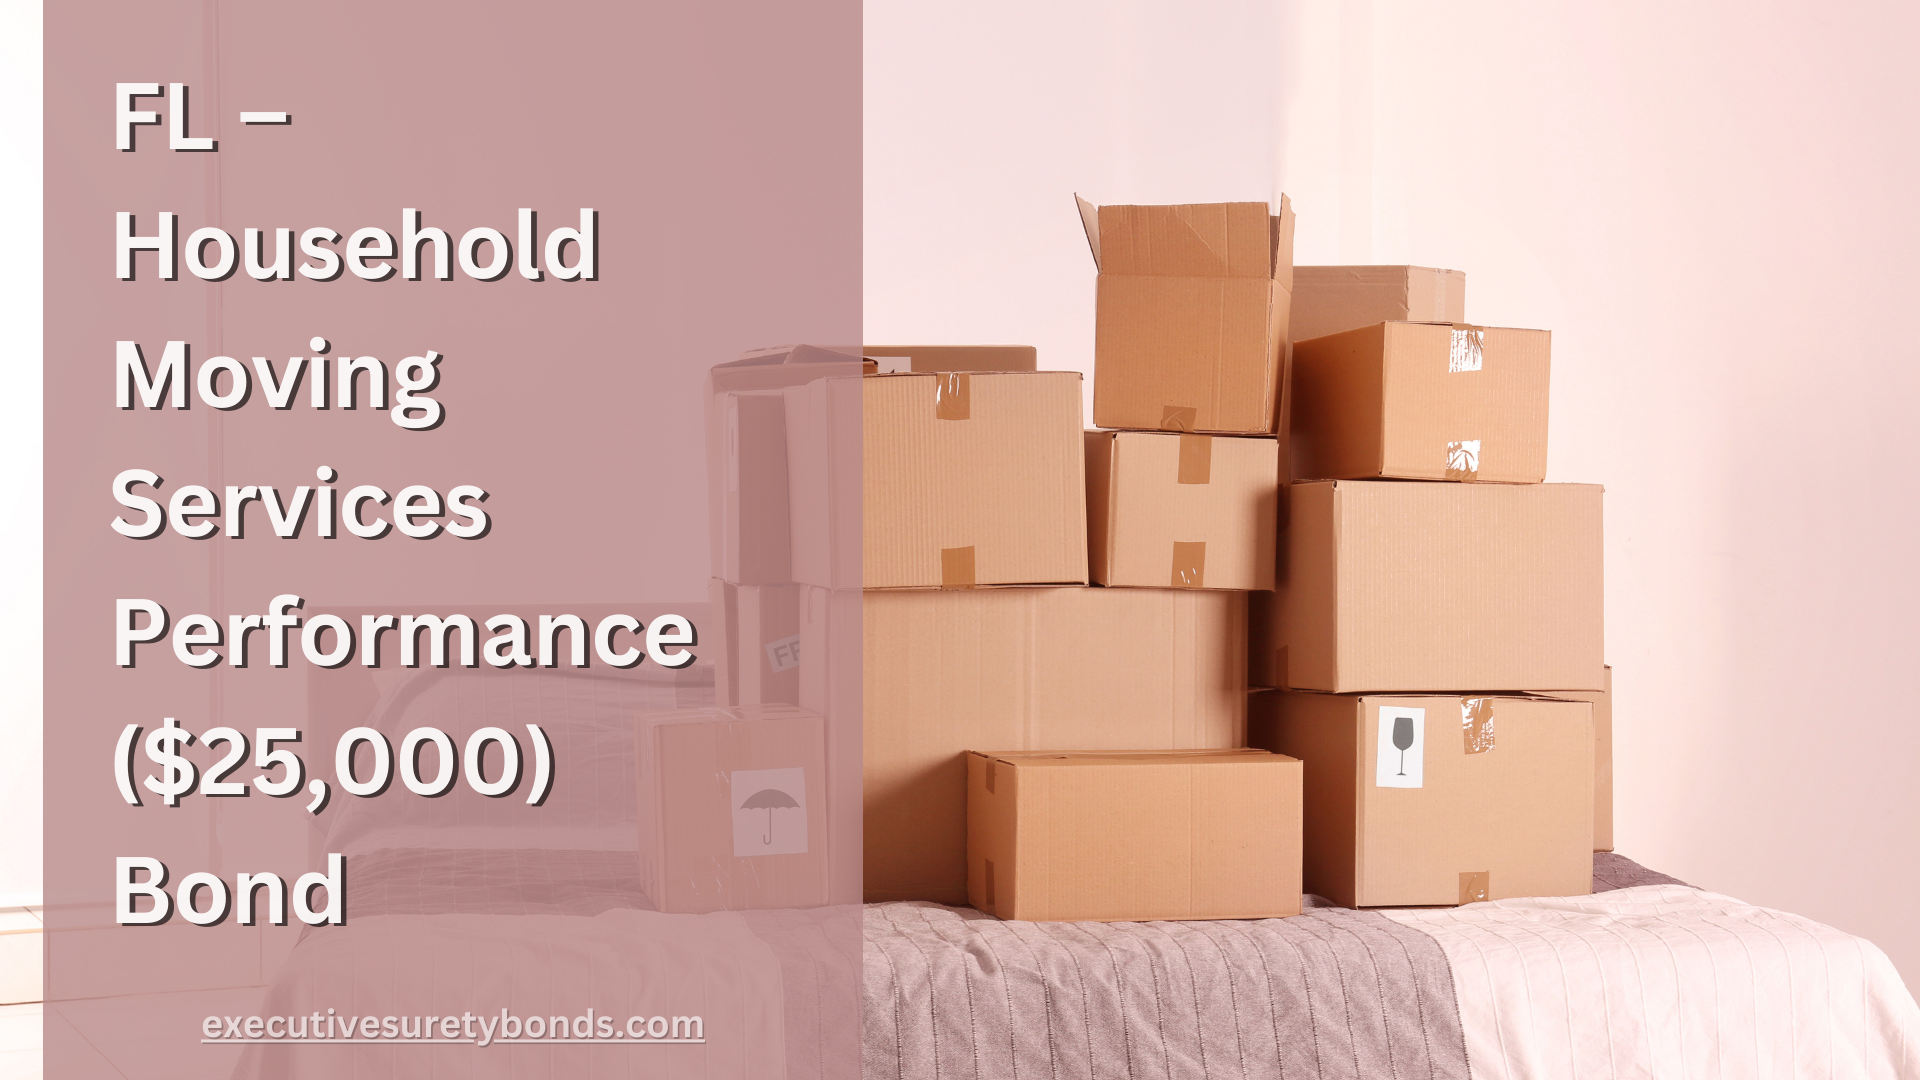 Household Moving Services Performance ($25,000) Bond